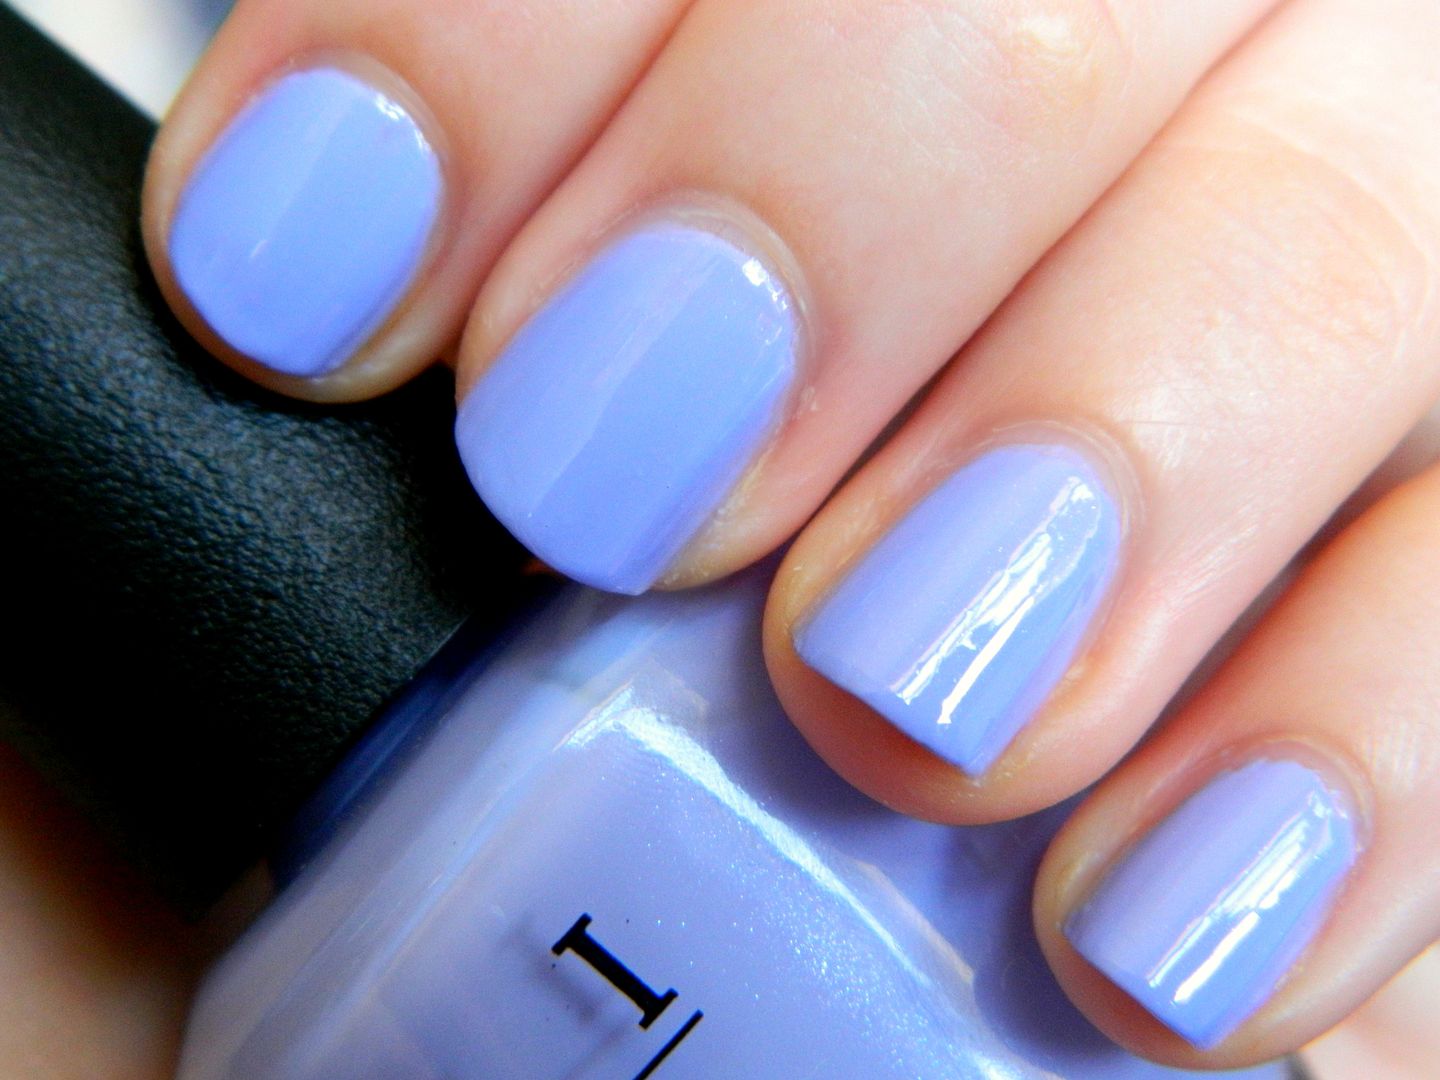 Nails Of The Day OPI Nail Lacquer You're Such A Budapest Swatch On The Nails Belle-amie UK Beauty Fashion Lifestyle Blog